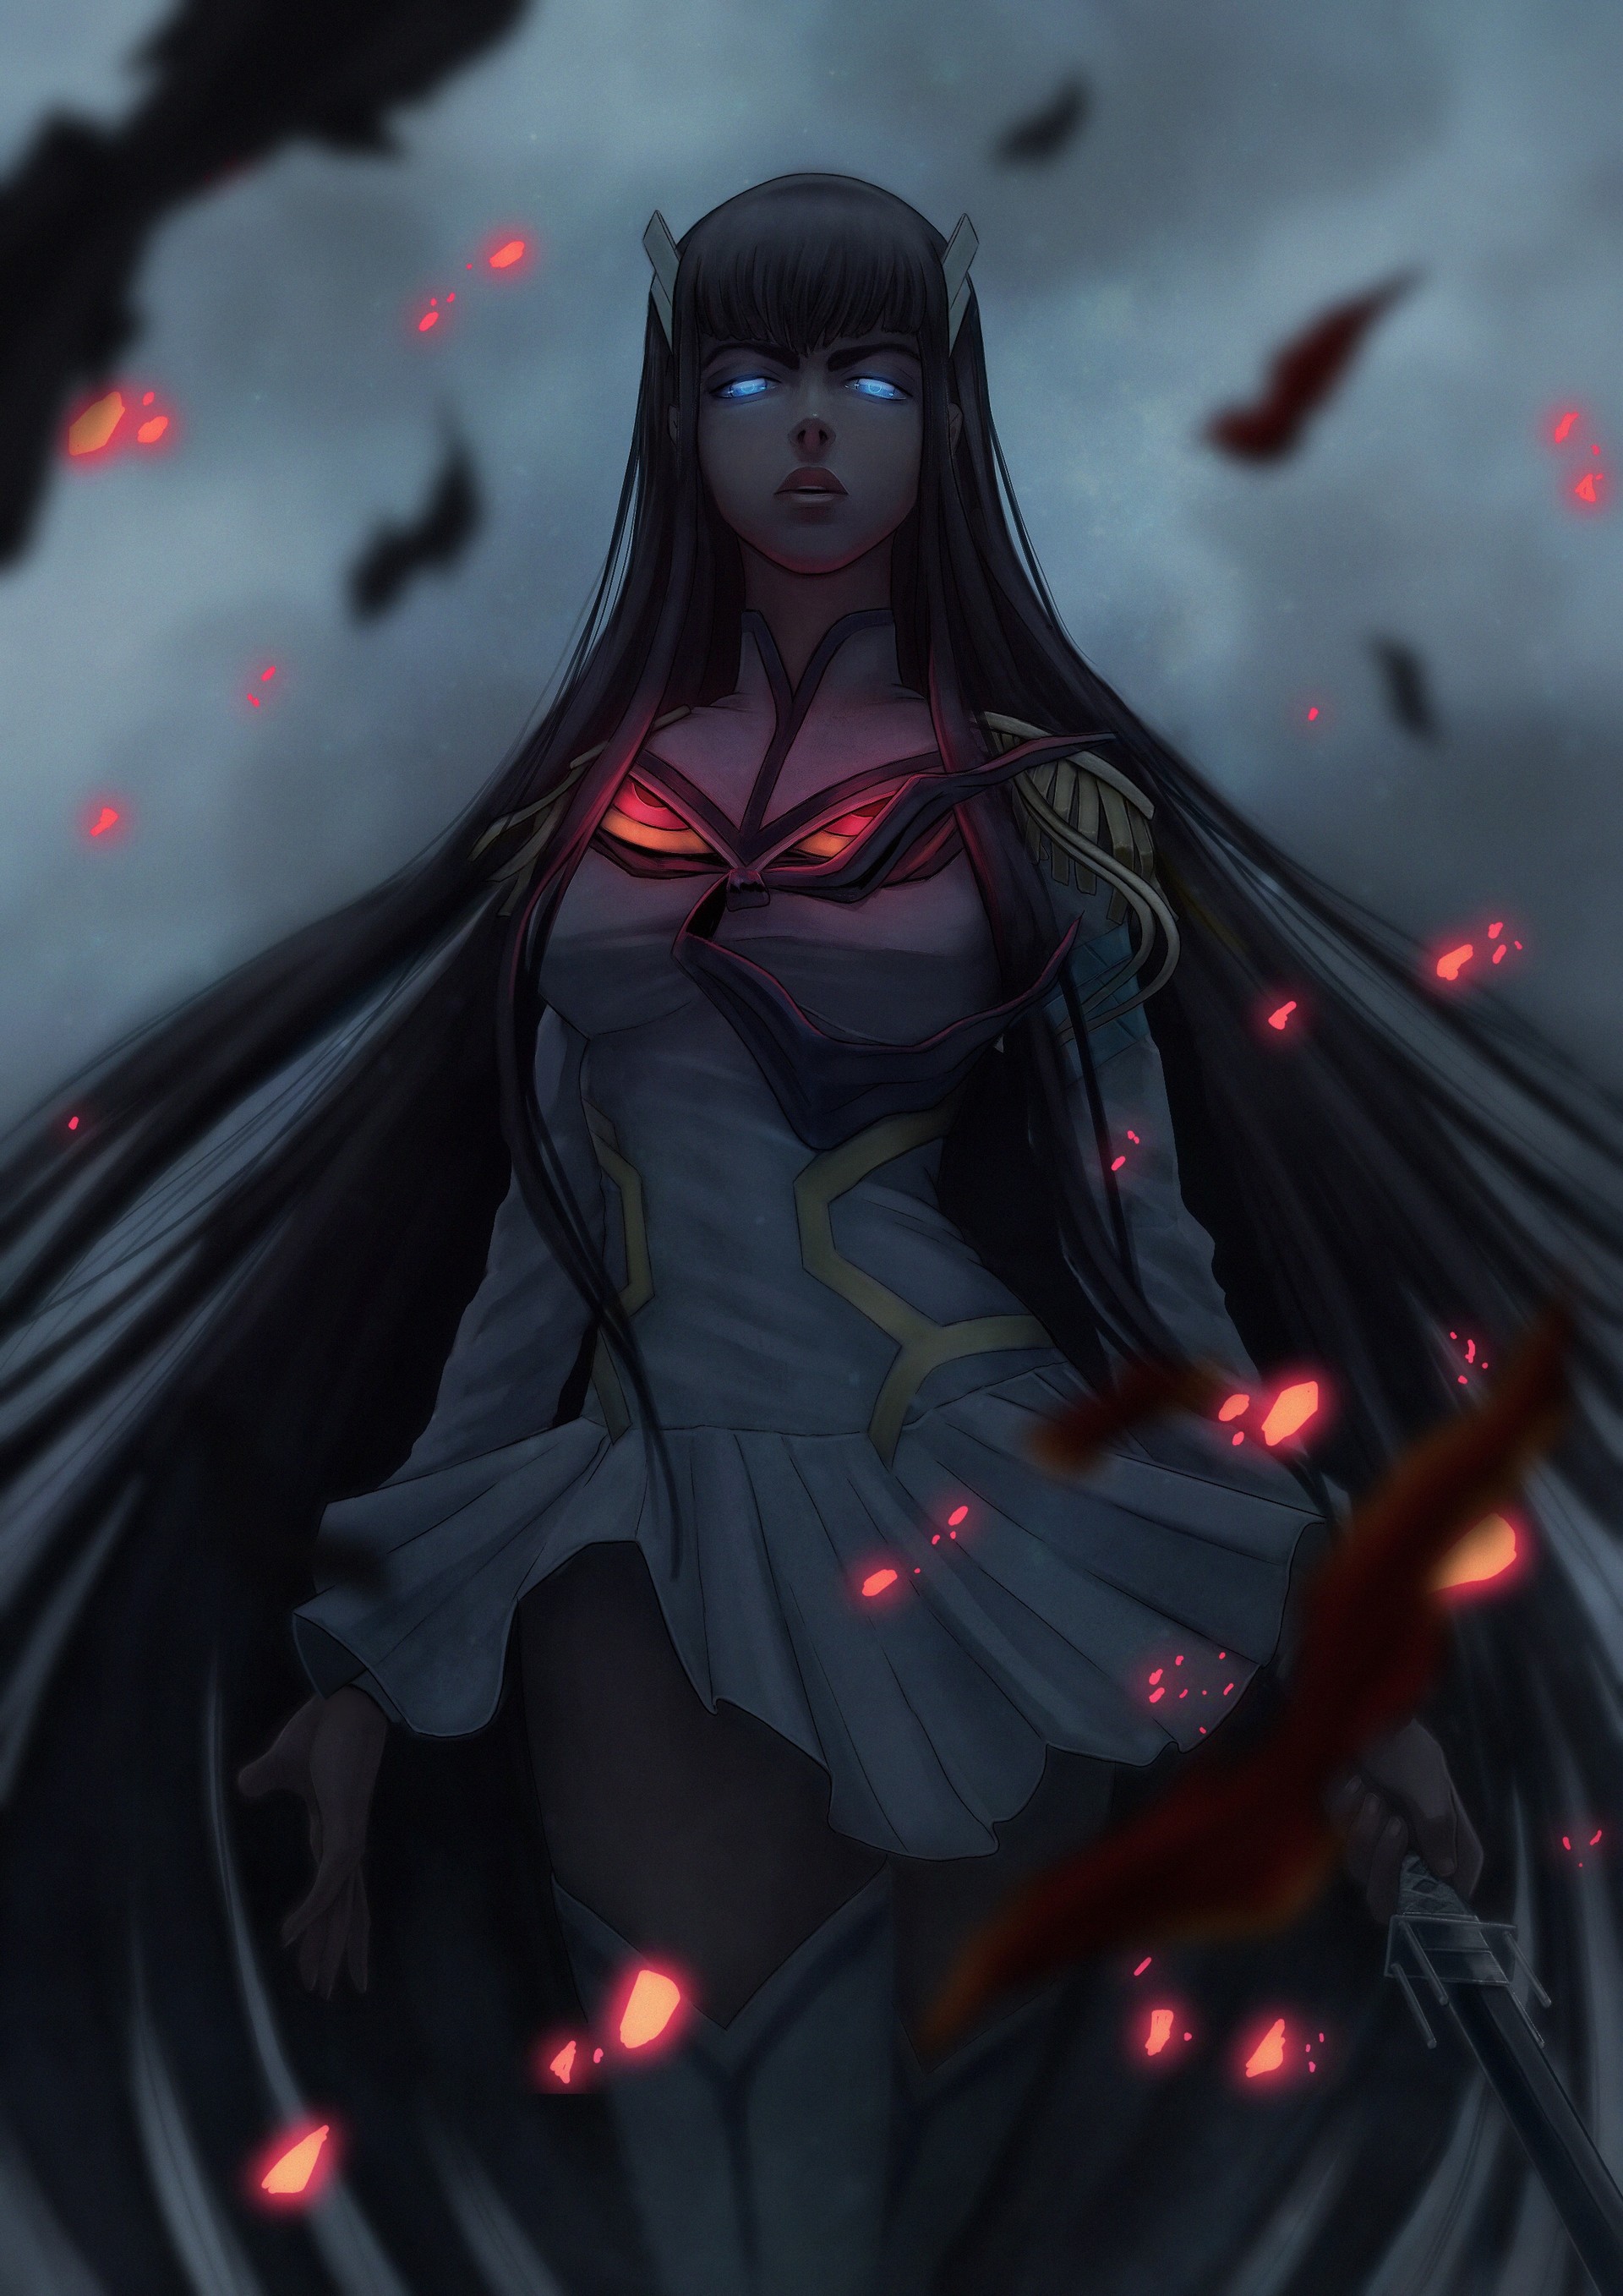 Anime 1920x2716 Kill la Kill anime girls female warrior women with swords Junketsu katana long hair thigh high boots thick thigh white dress curvy fire Kiryuin Satsuki black hair 2D looking at viewer blue eyes hair blowing in the wind Jacob Noble portrait display fan art low-angle anime glowing eyes